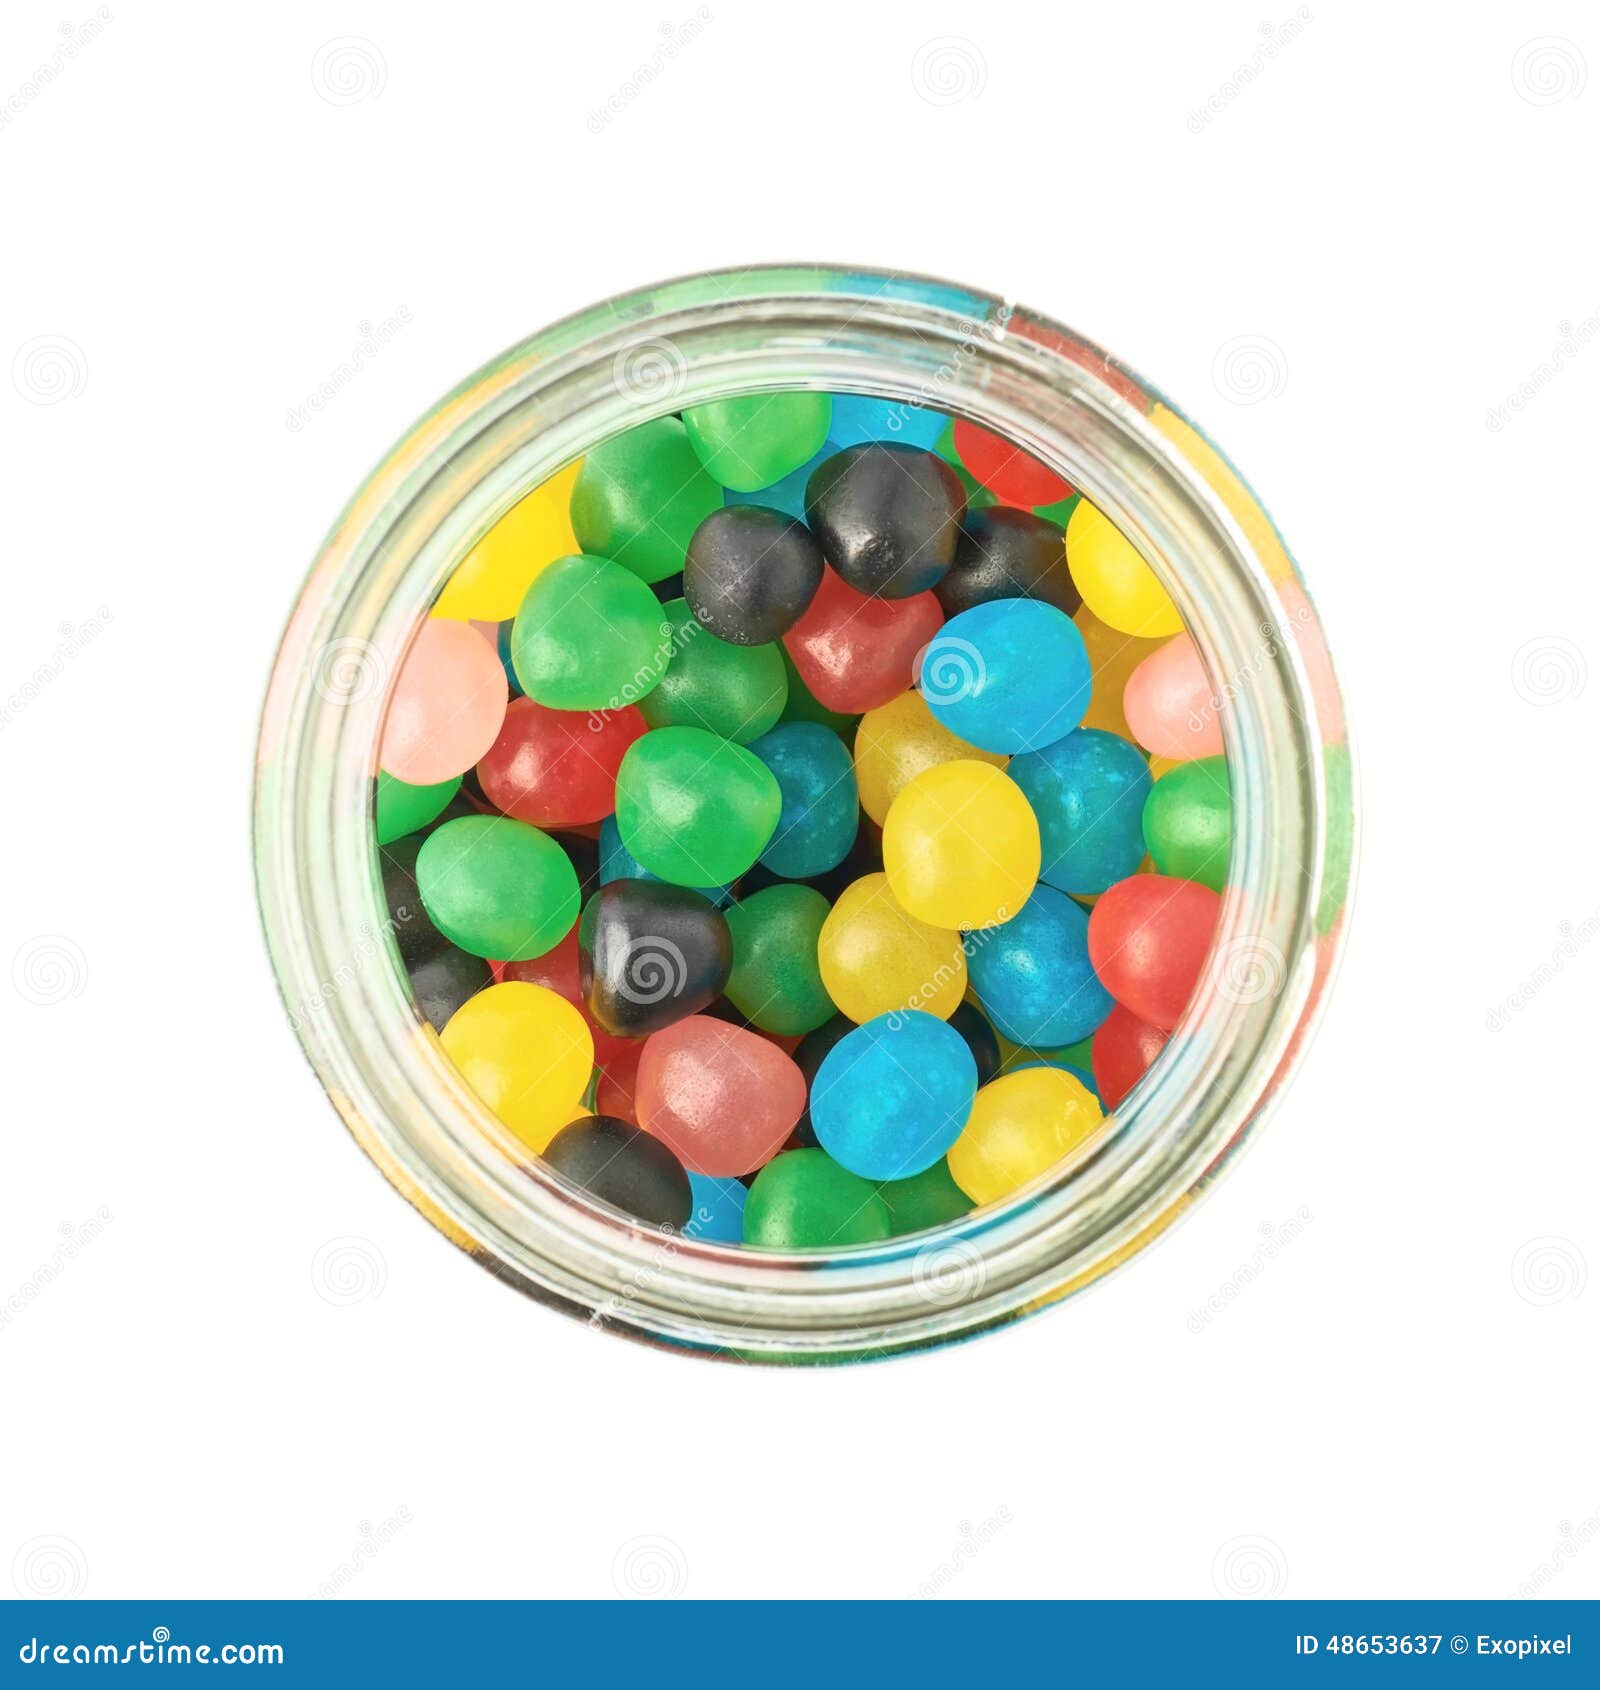 Jar Full of Candy Ball Sweets Stock Image - Image of flavor, dessert ...